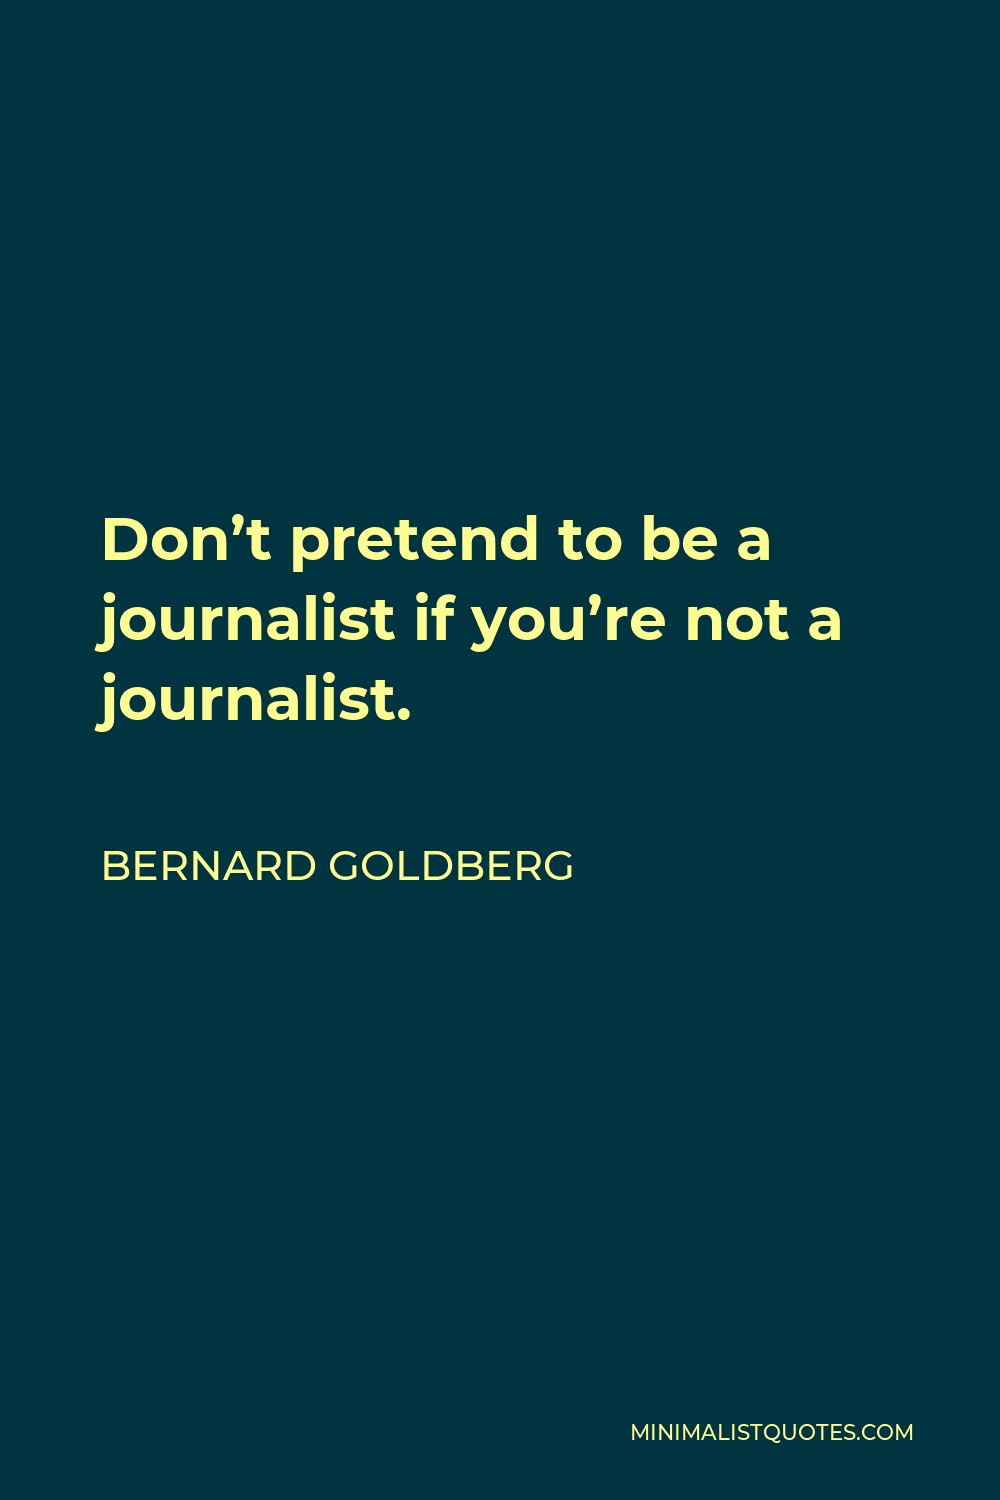 Bernard Goldberg Quote - Don’t pretend to be a journalist if you’re not a journalist.